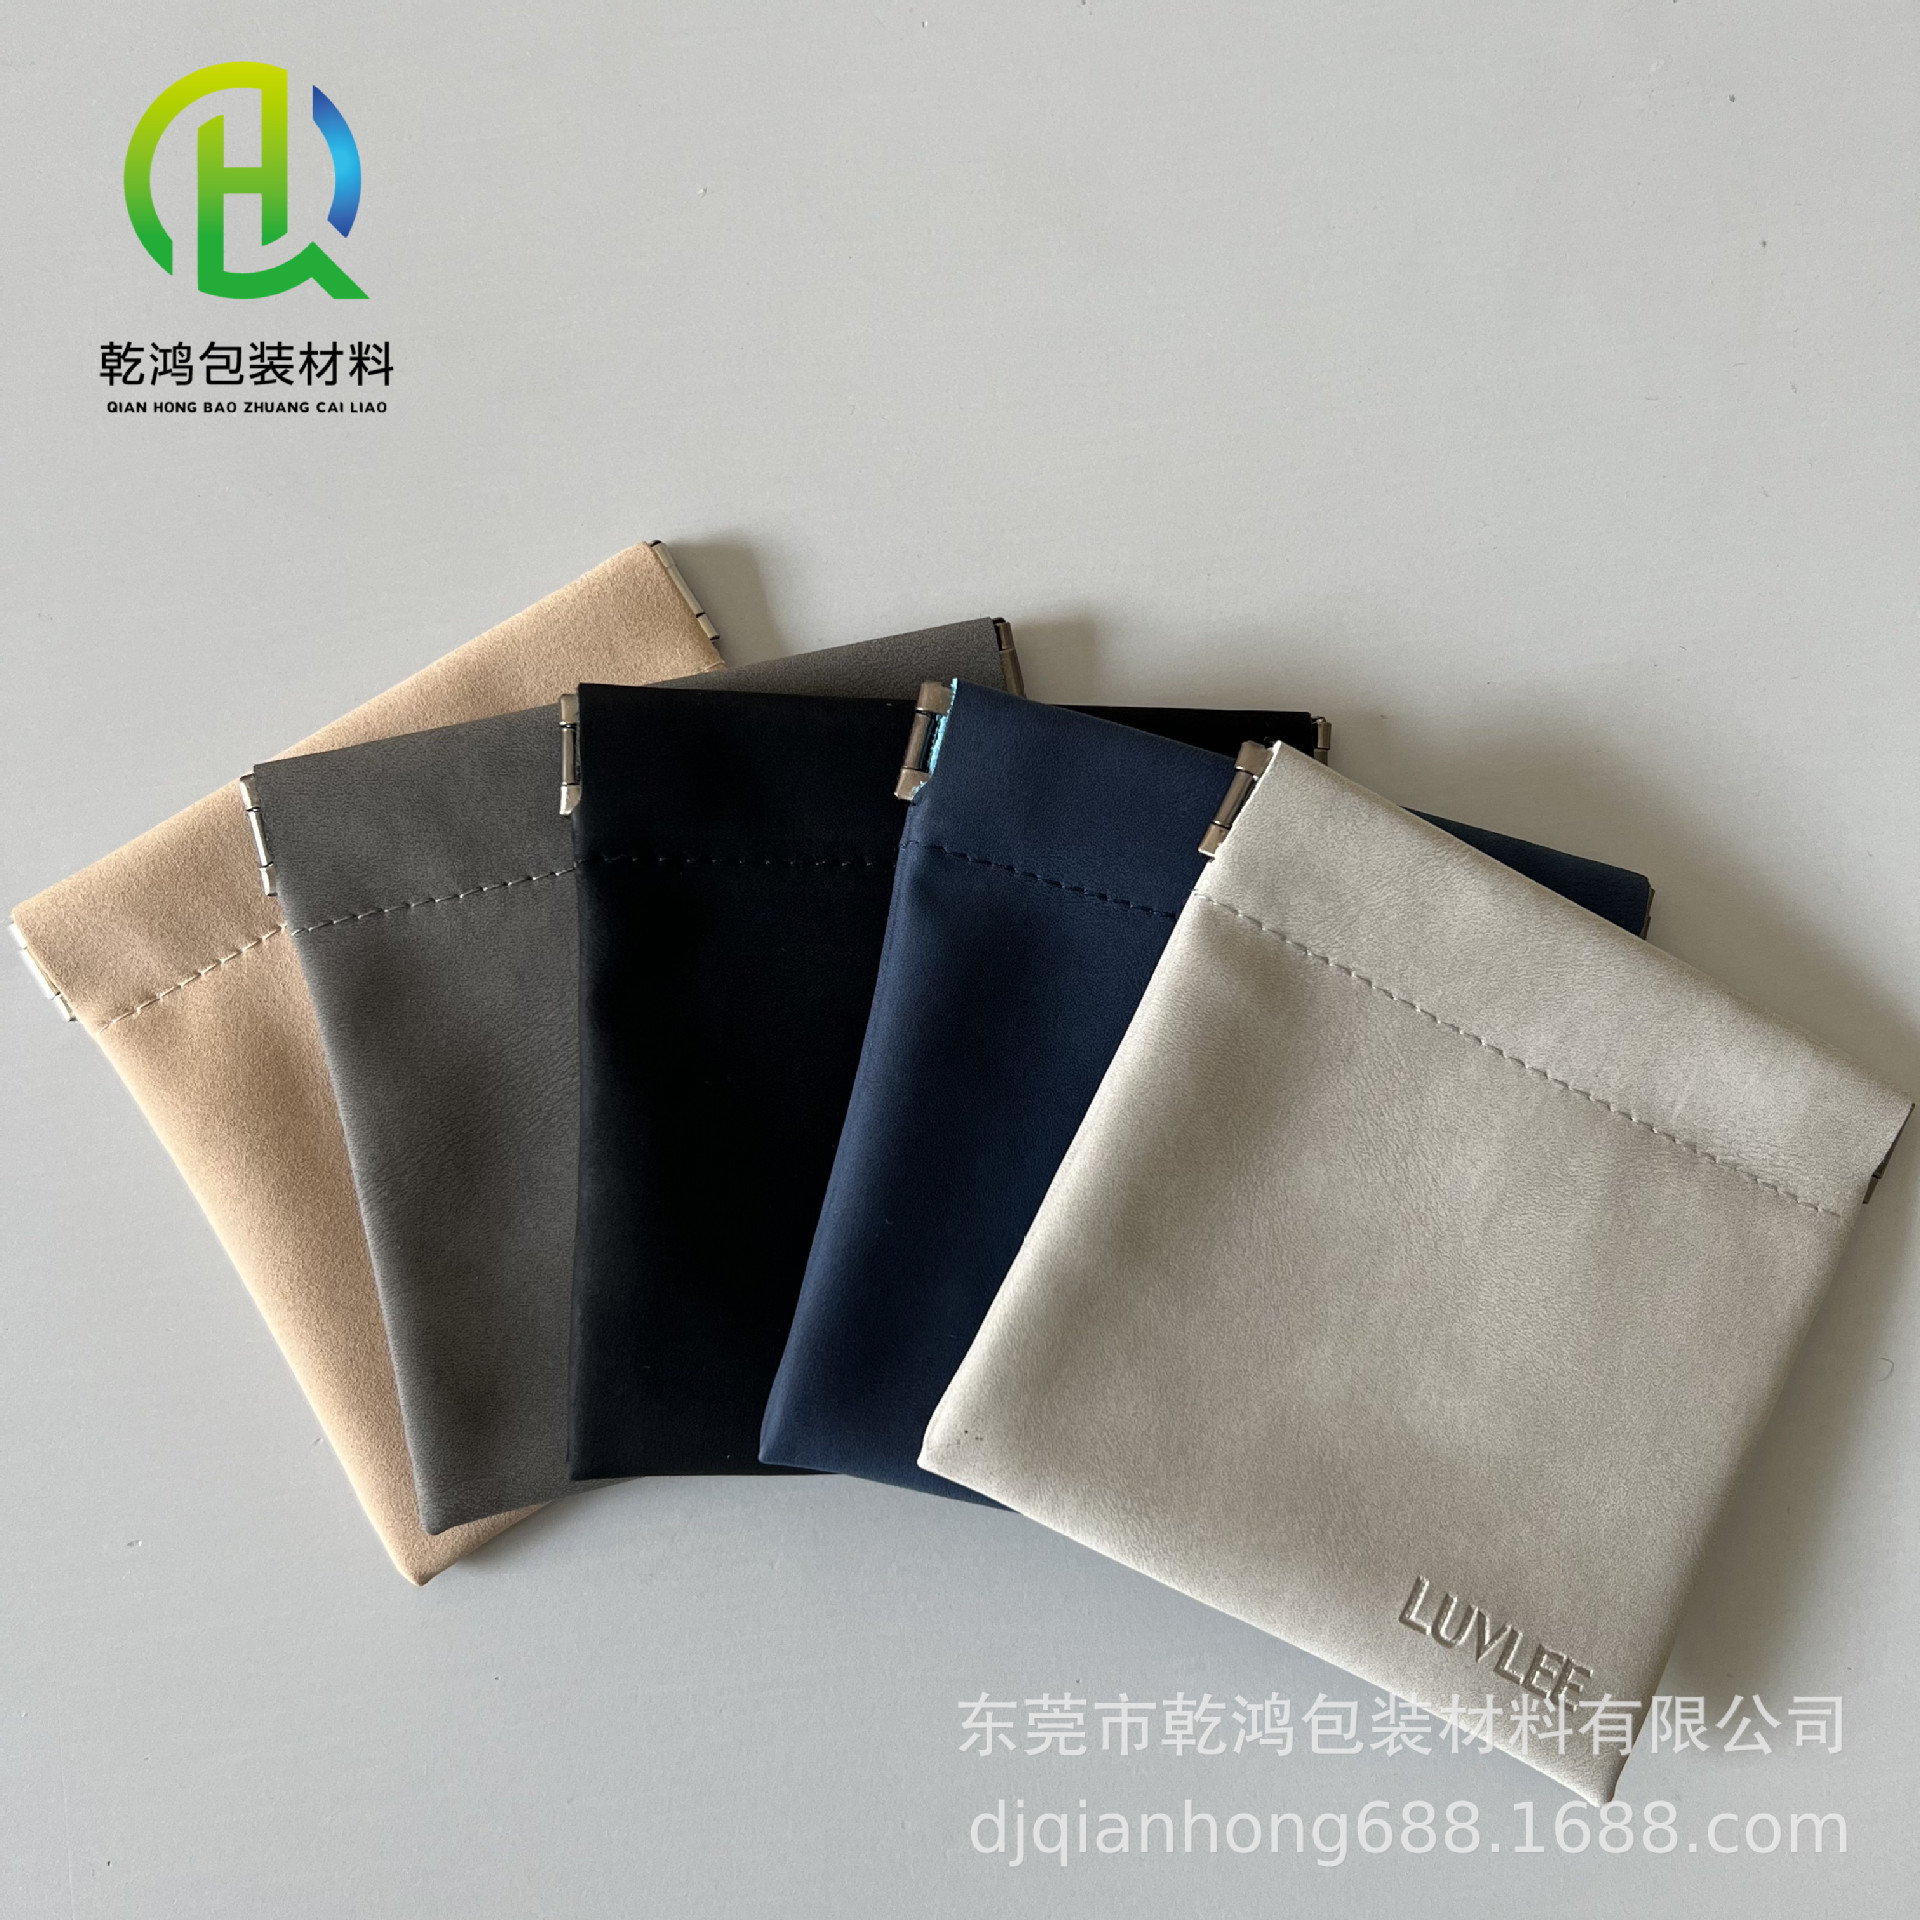 Factory Supply Shrapnel Bag Pu Earphone Bag Automatic Tight Port Data Cable Small Change Storage Bag Jewelry Glasses Bag